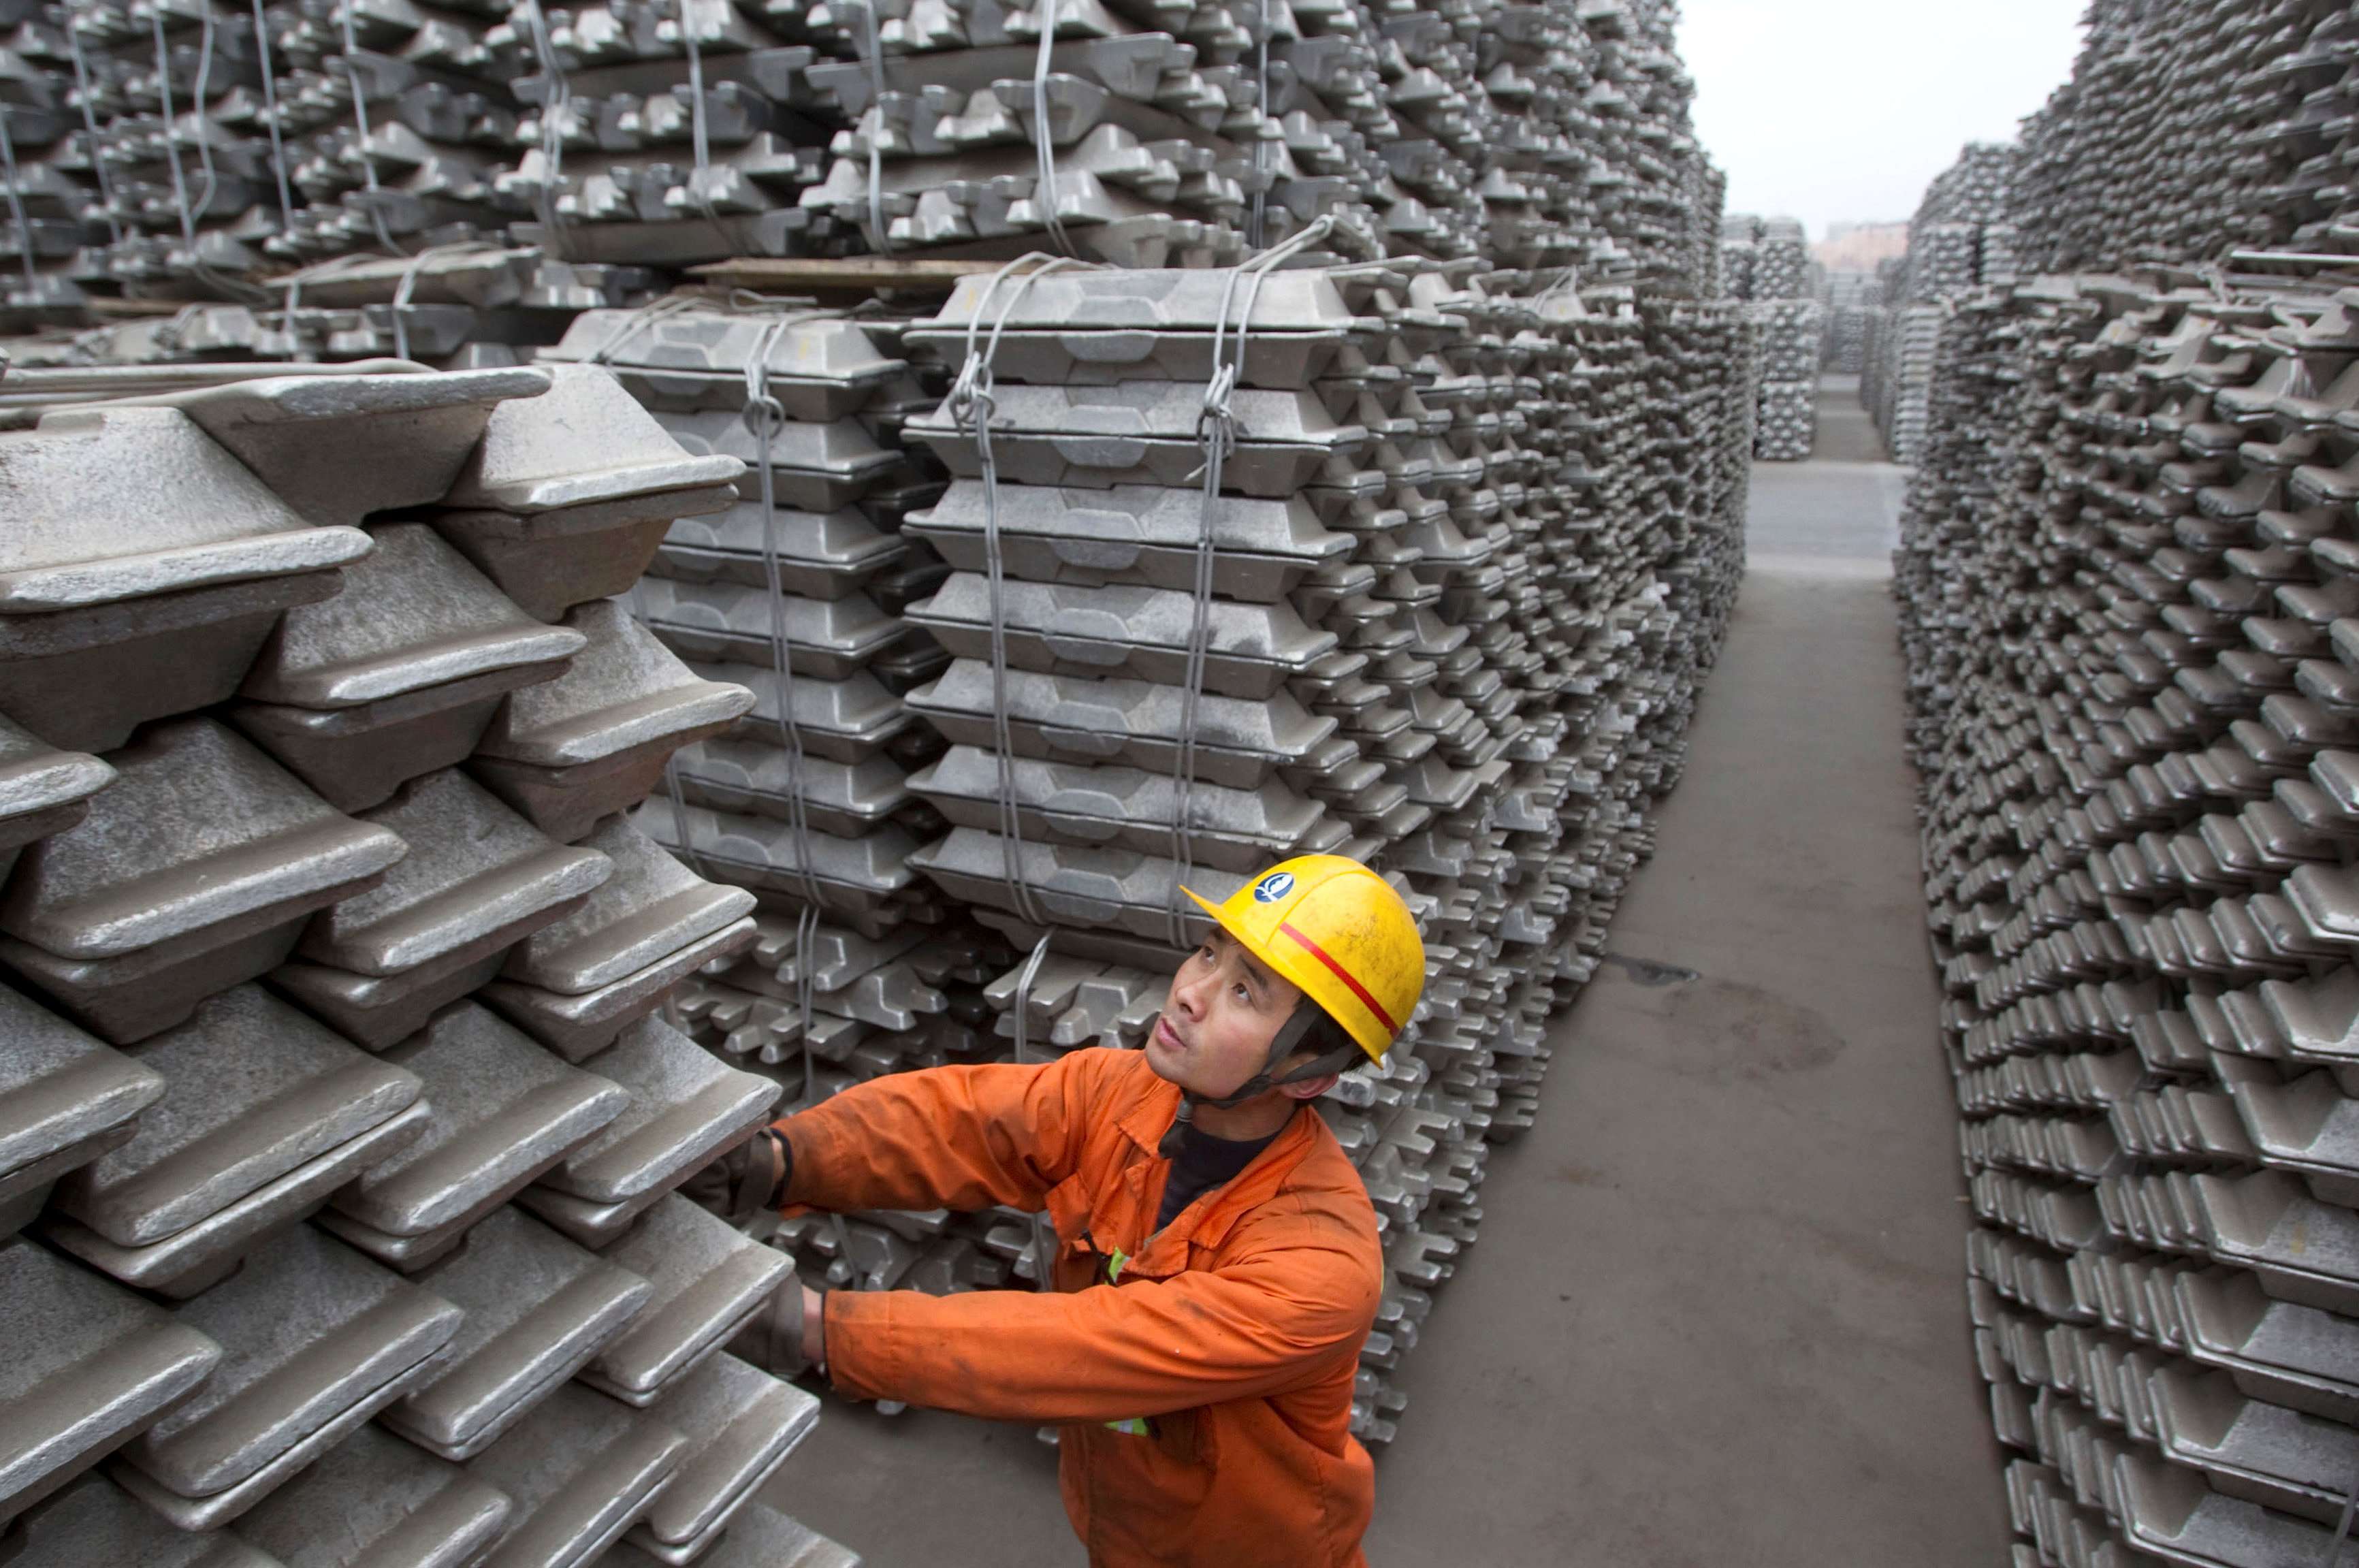 An employee checks aluminium ingots for export at the Qingdao Port, Shandong province on March 14, 2010. Photo: Reuters